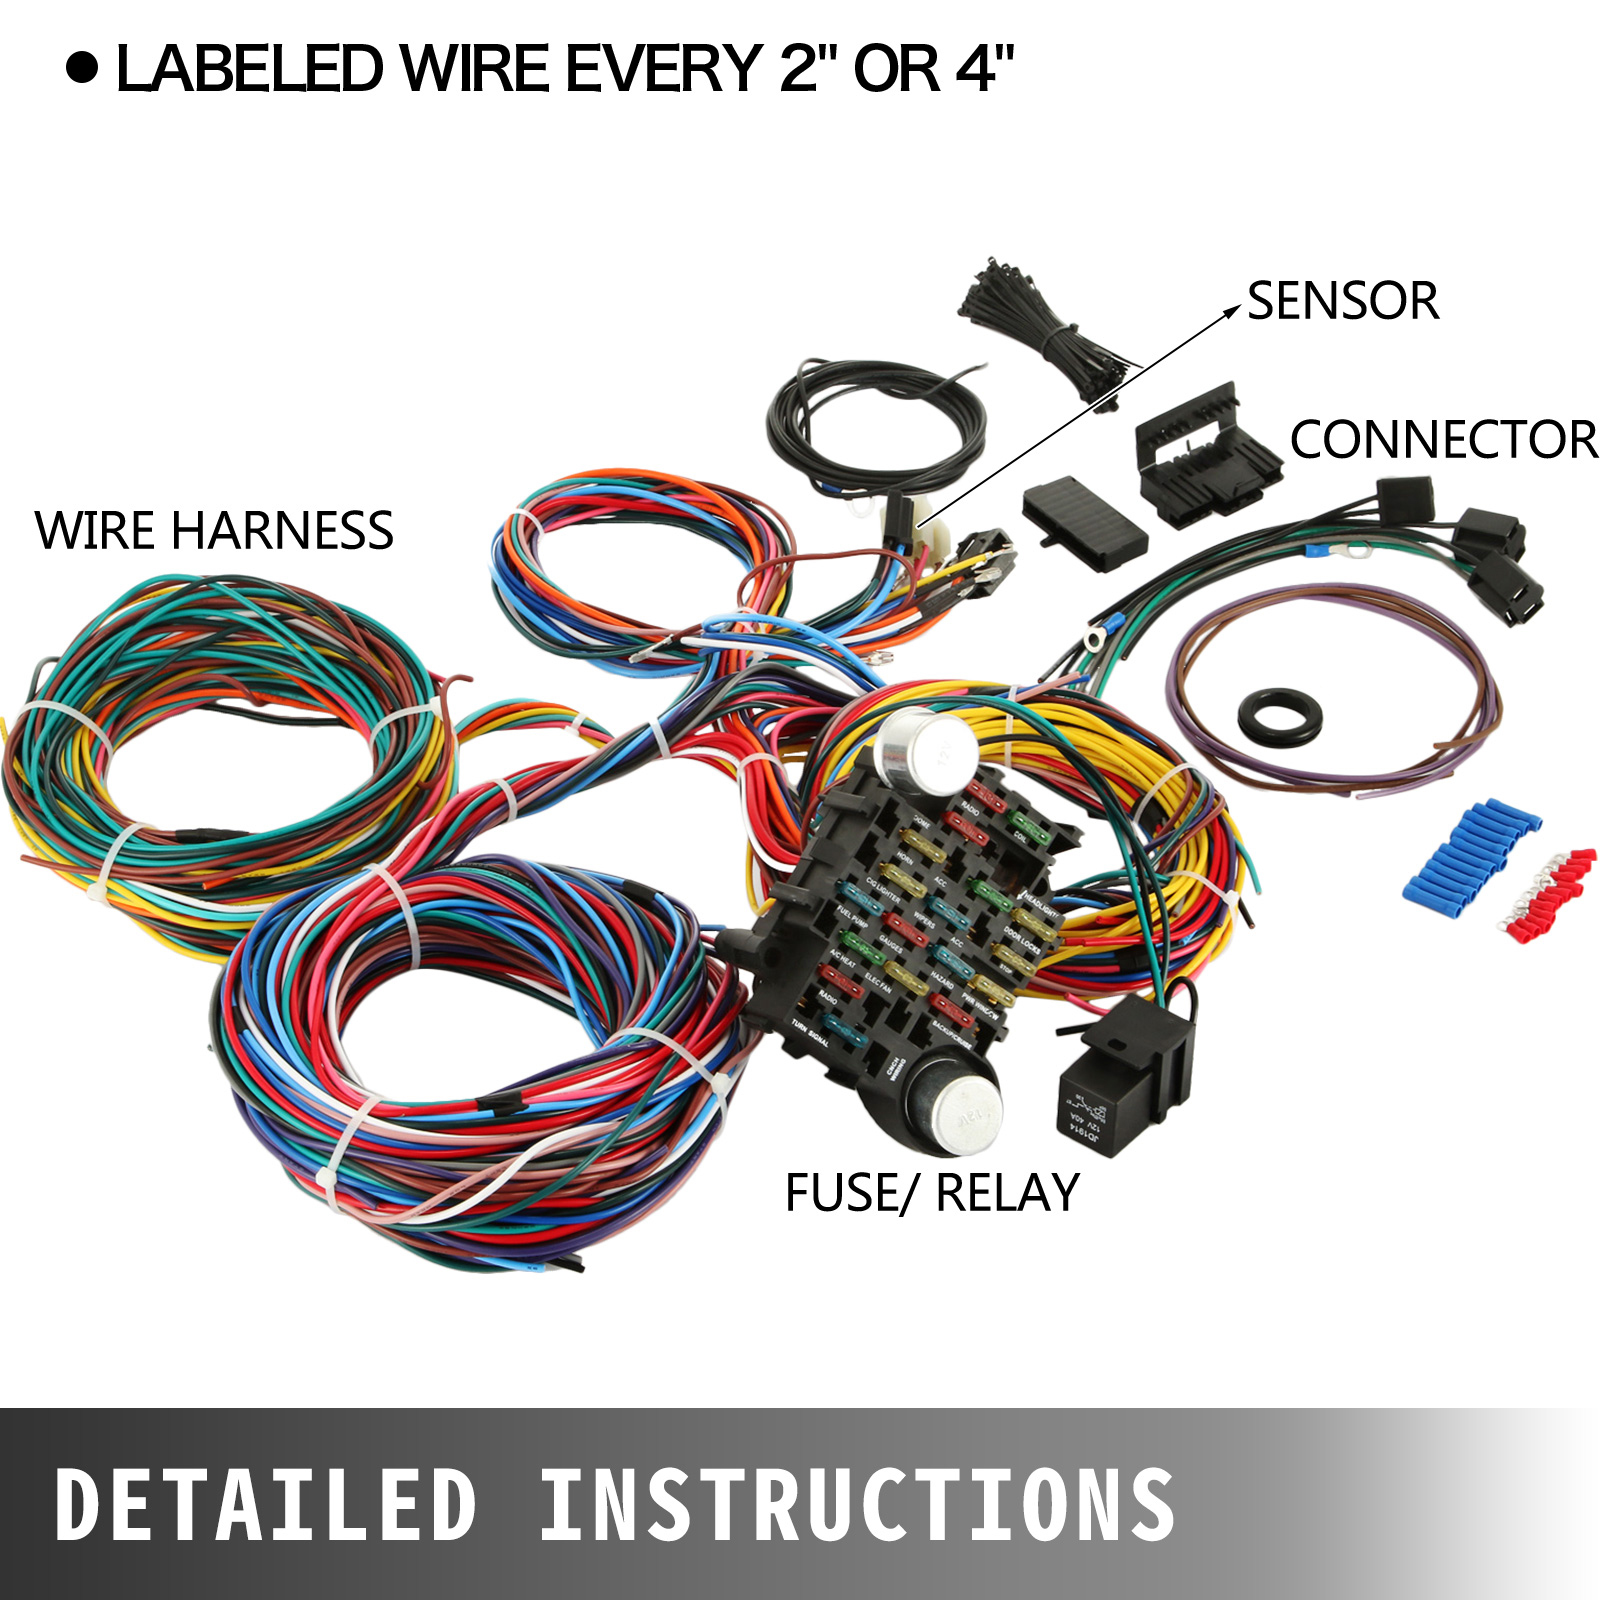 21 Circuit Wiring Harness Fit Chevy Universal Hotrods Install Wires | eBay